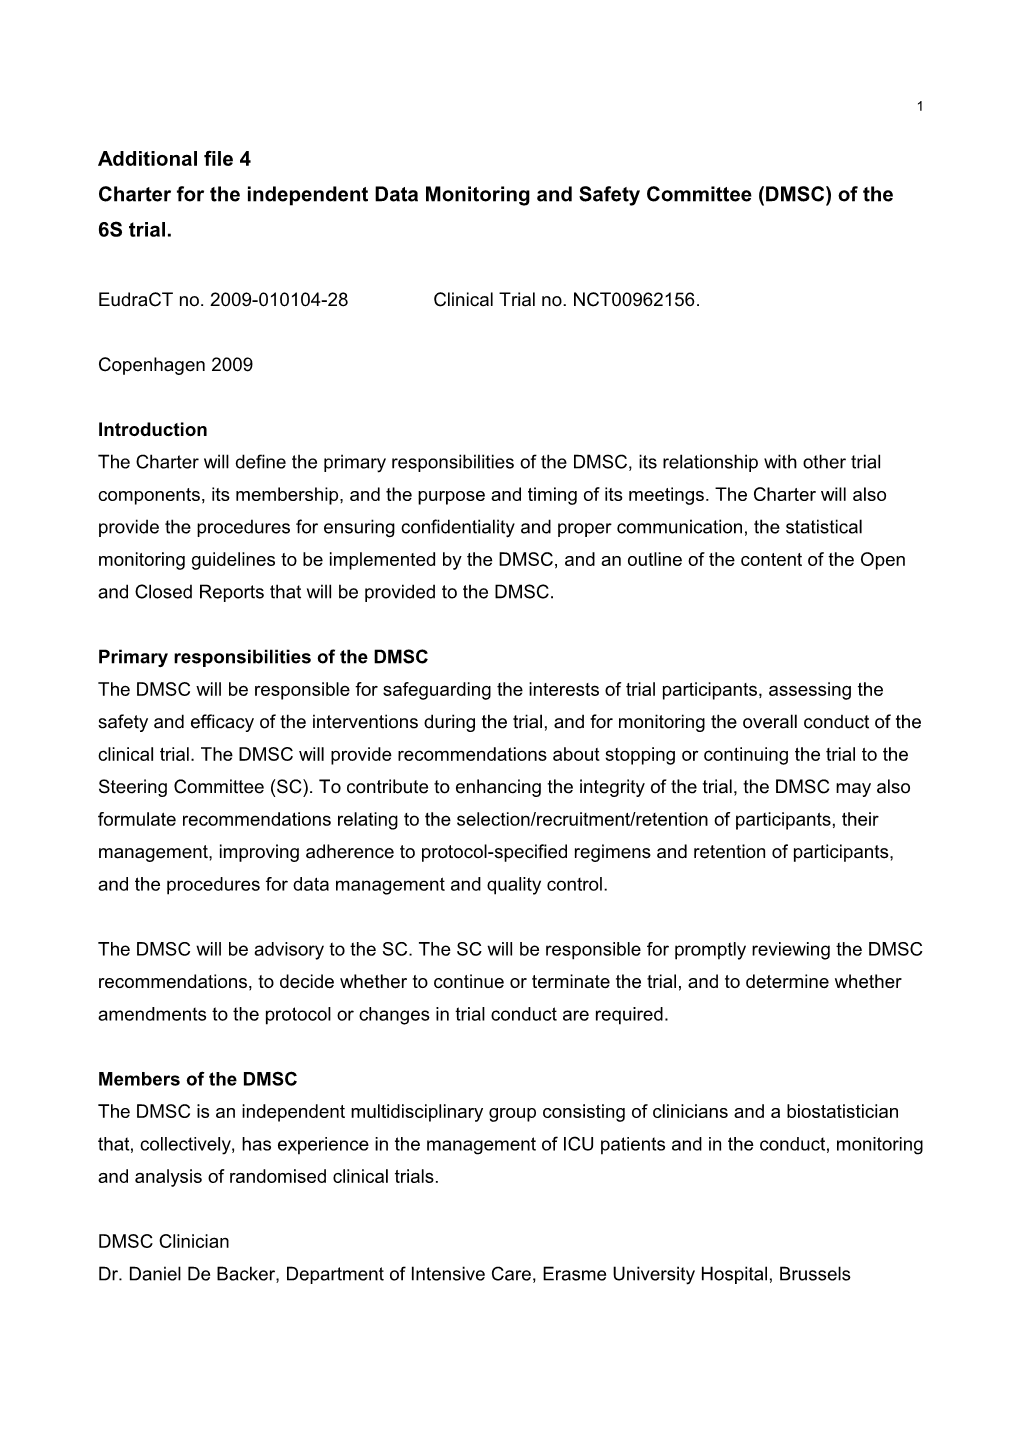 Charter for the Independent Data Monitoring and Safety Committee (DMSC) of the 6S Trial